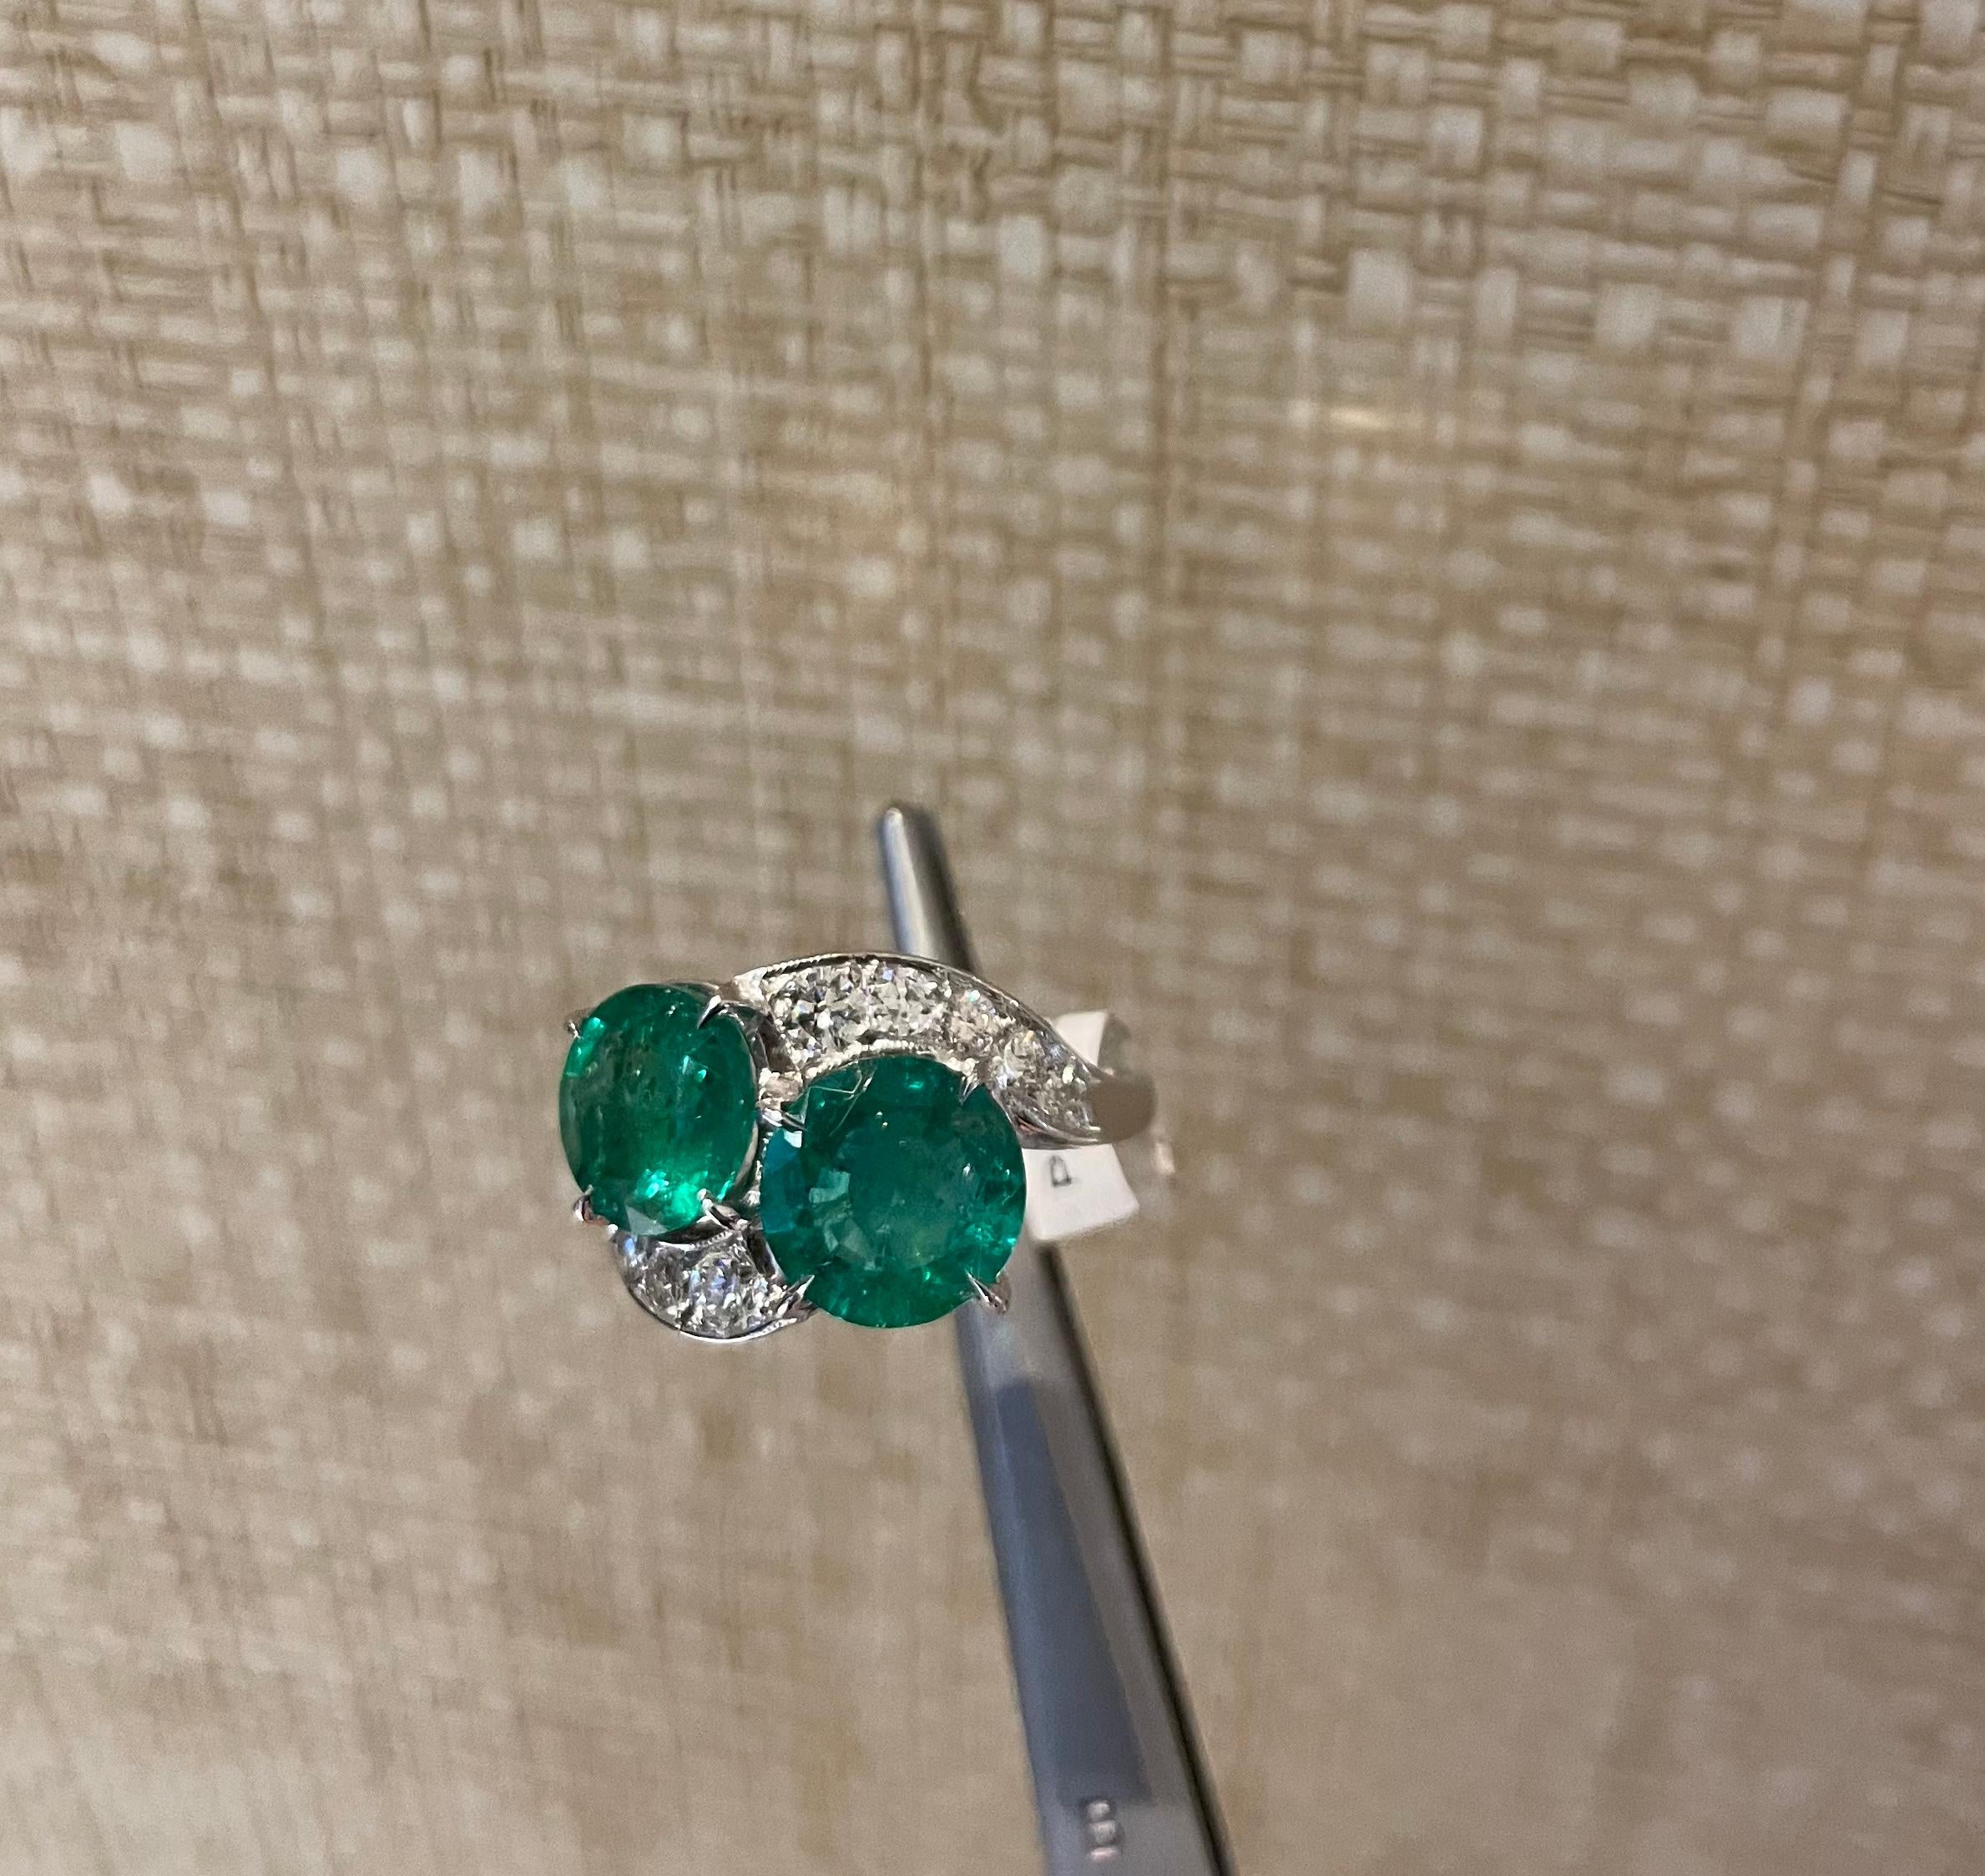 Beautiful emerald and diamond ring with a unique vintage design. Approximately 4.5 carats of round emeralds and .75 carats of round brilliant diamonds set in platinum

Size 6.5